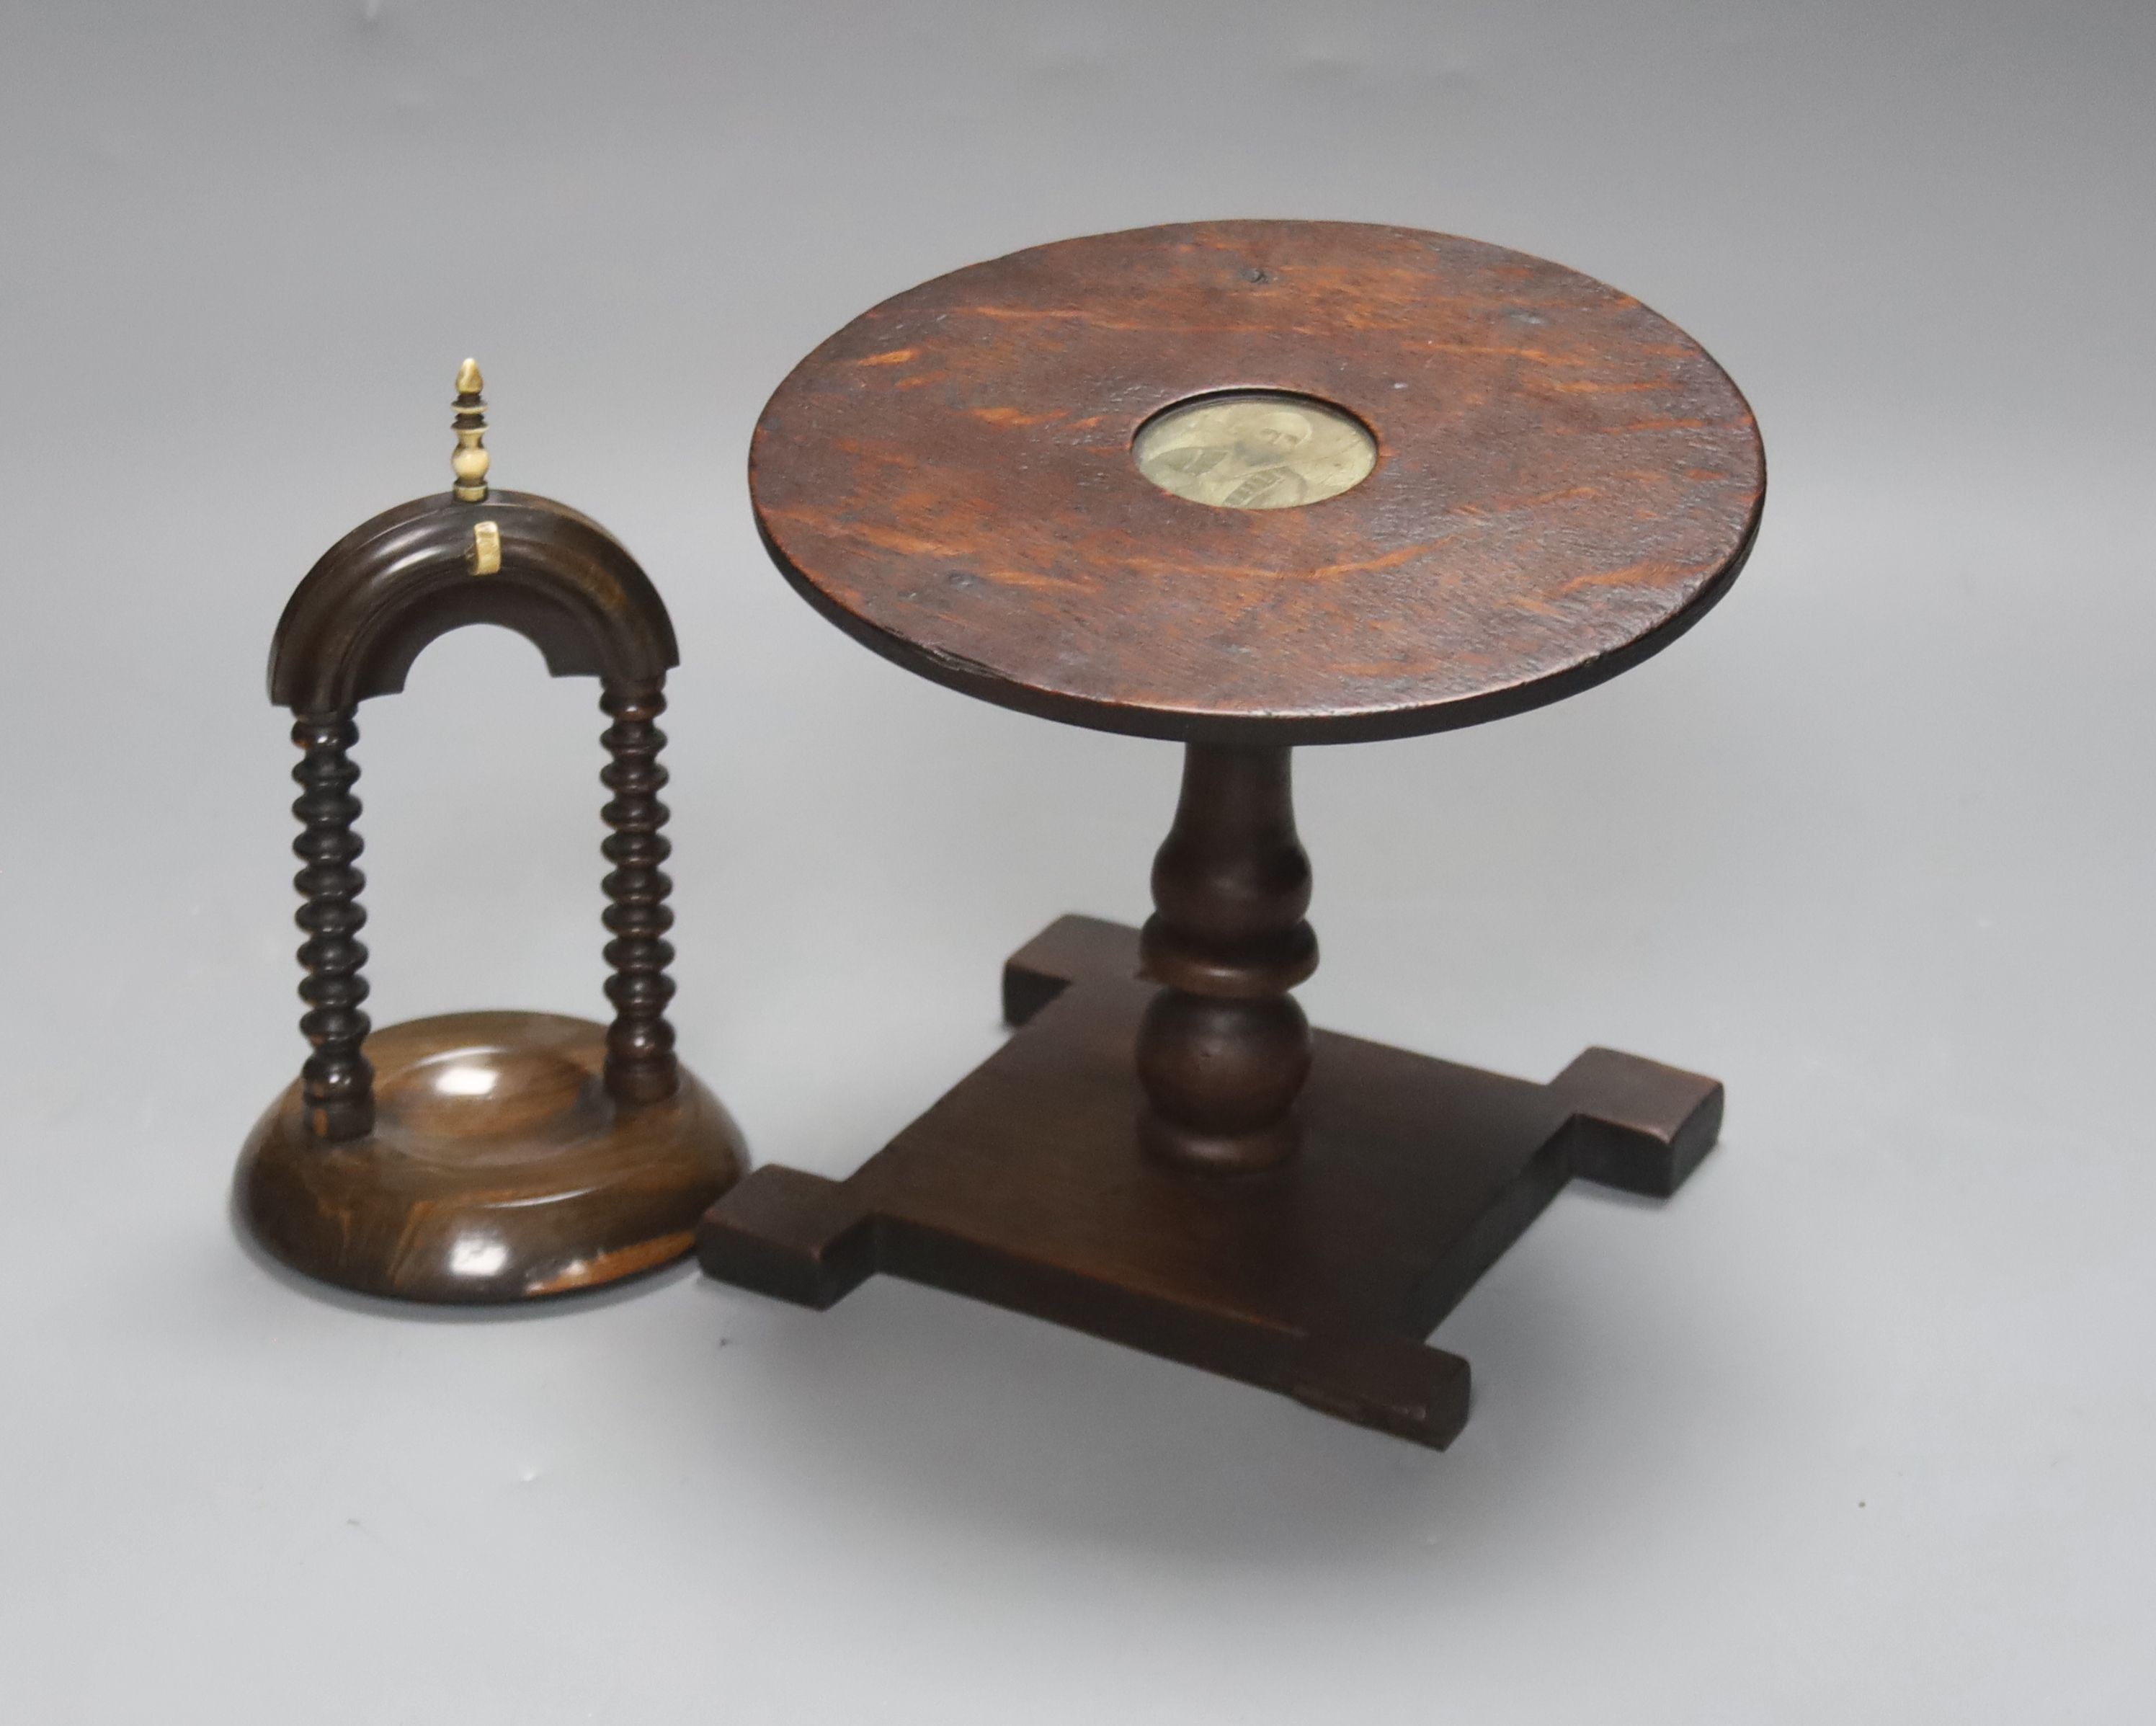 A 19th century oak miniature tilt top table with naval portrait, 23.5cm high tilted up, and a lignum vitae watchstand